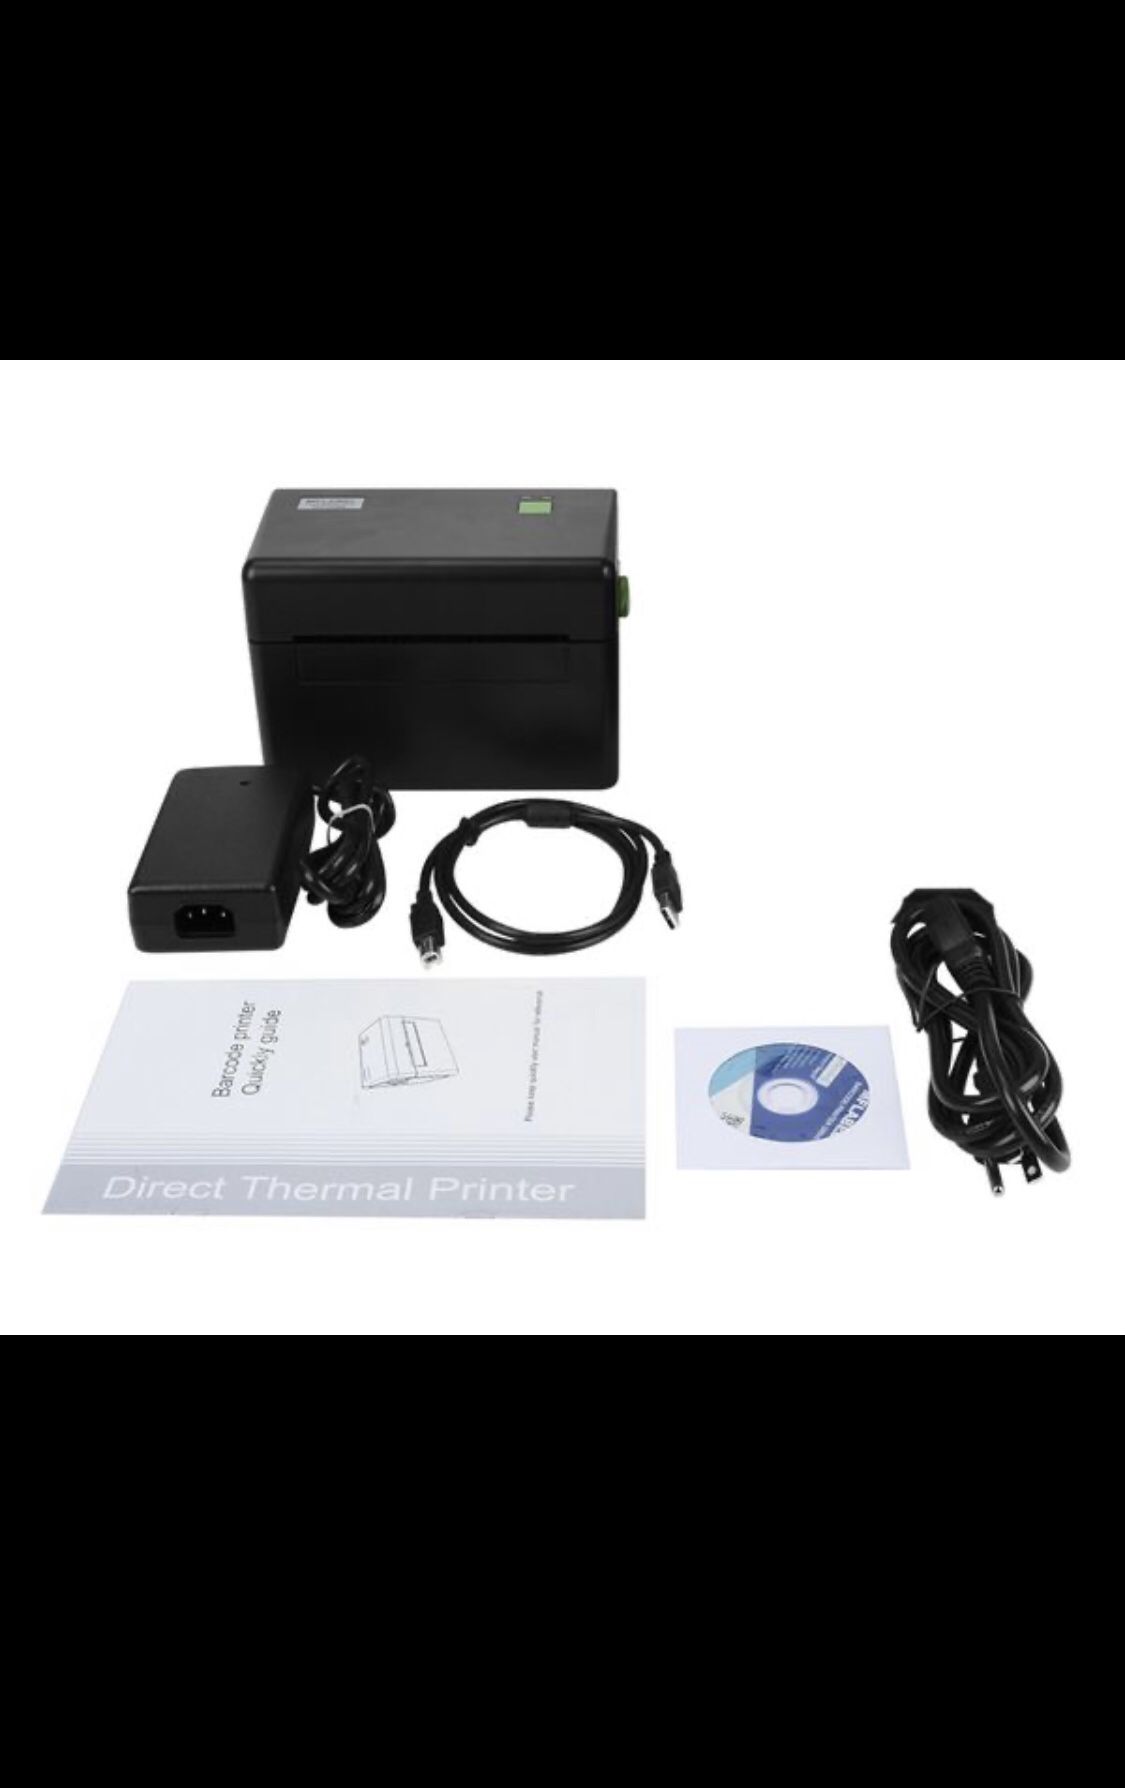 MFLABEL Commercial 4x6 Thermal Shipping Label printer